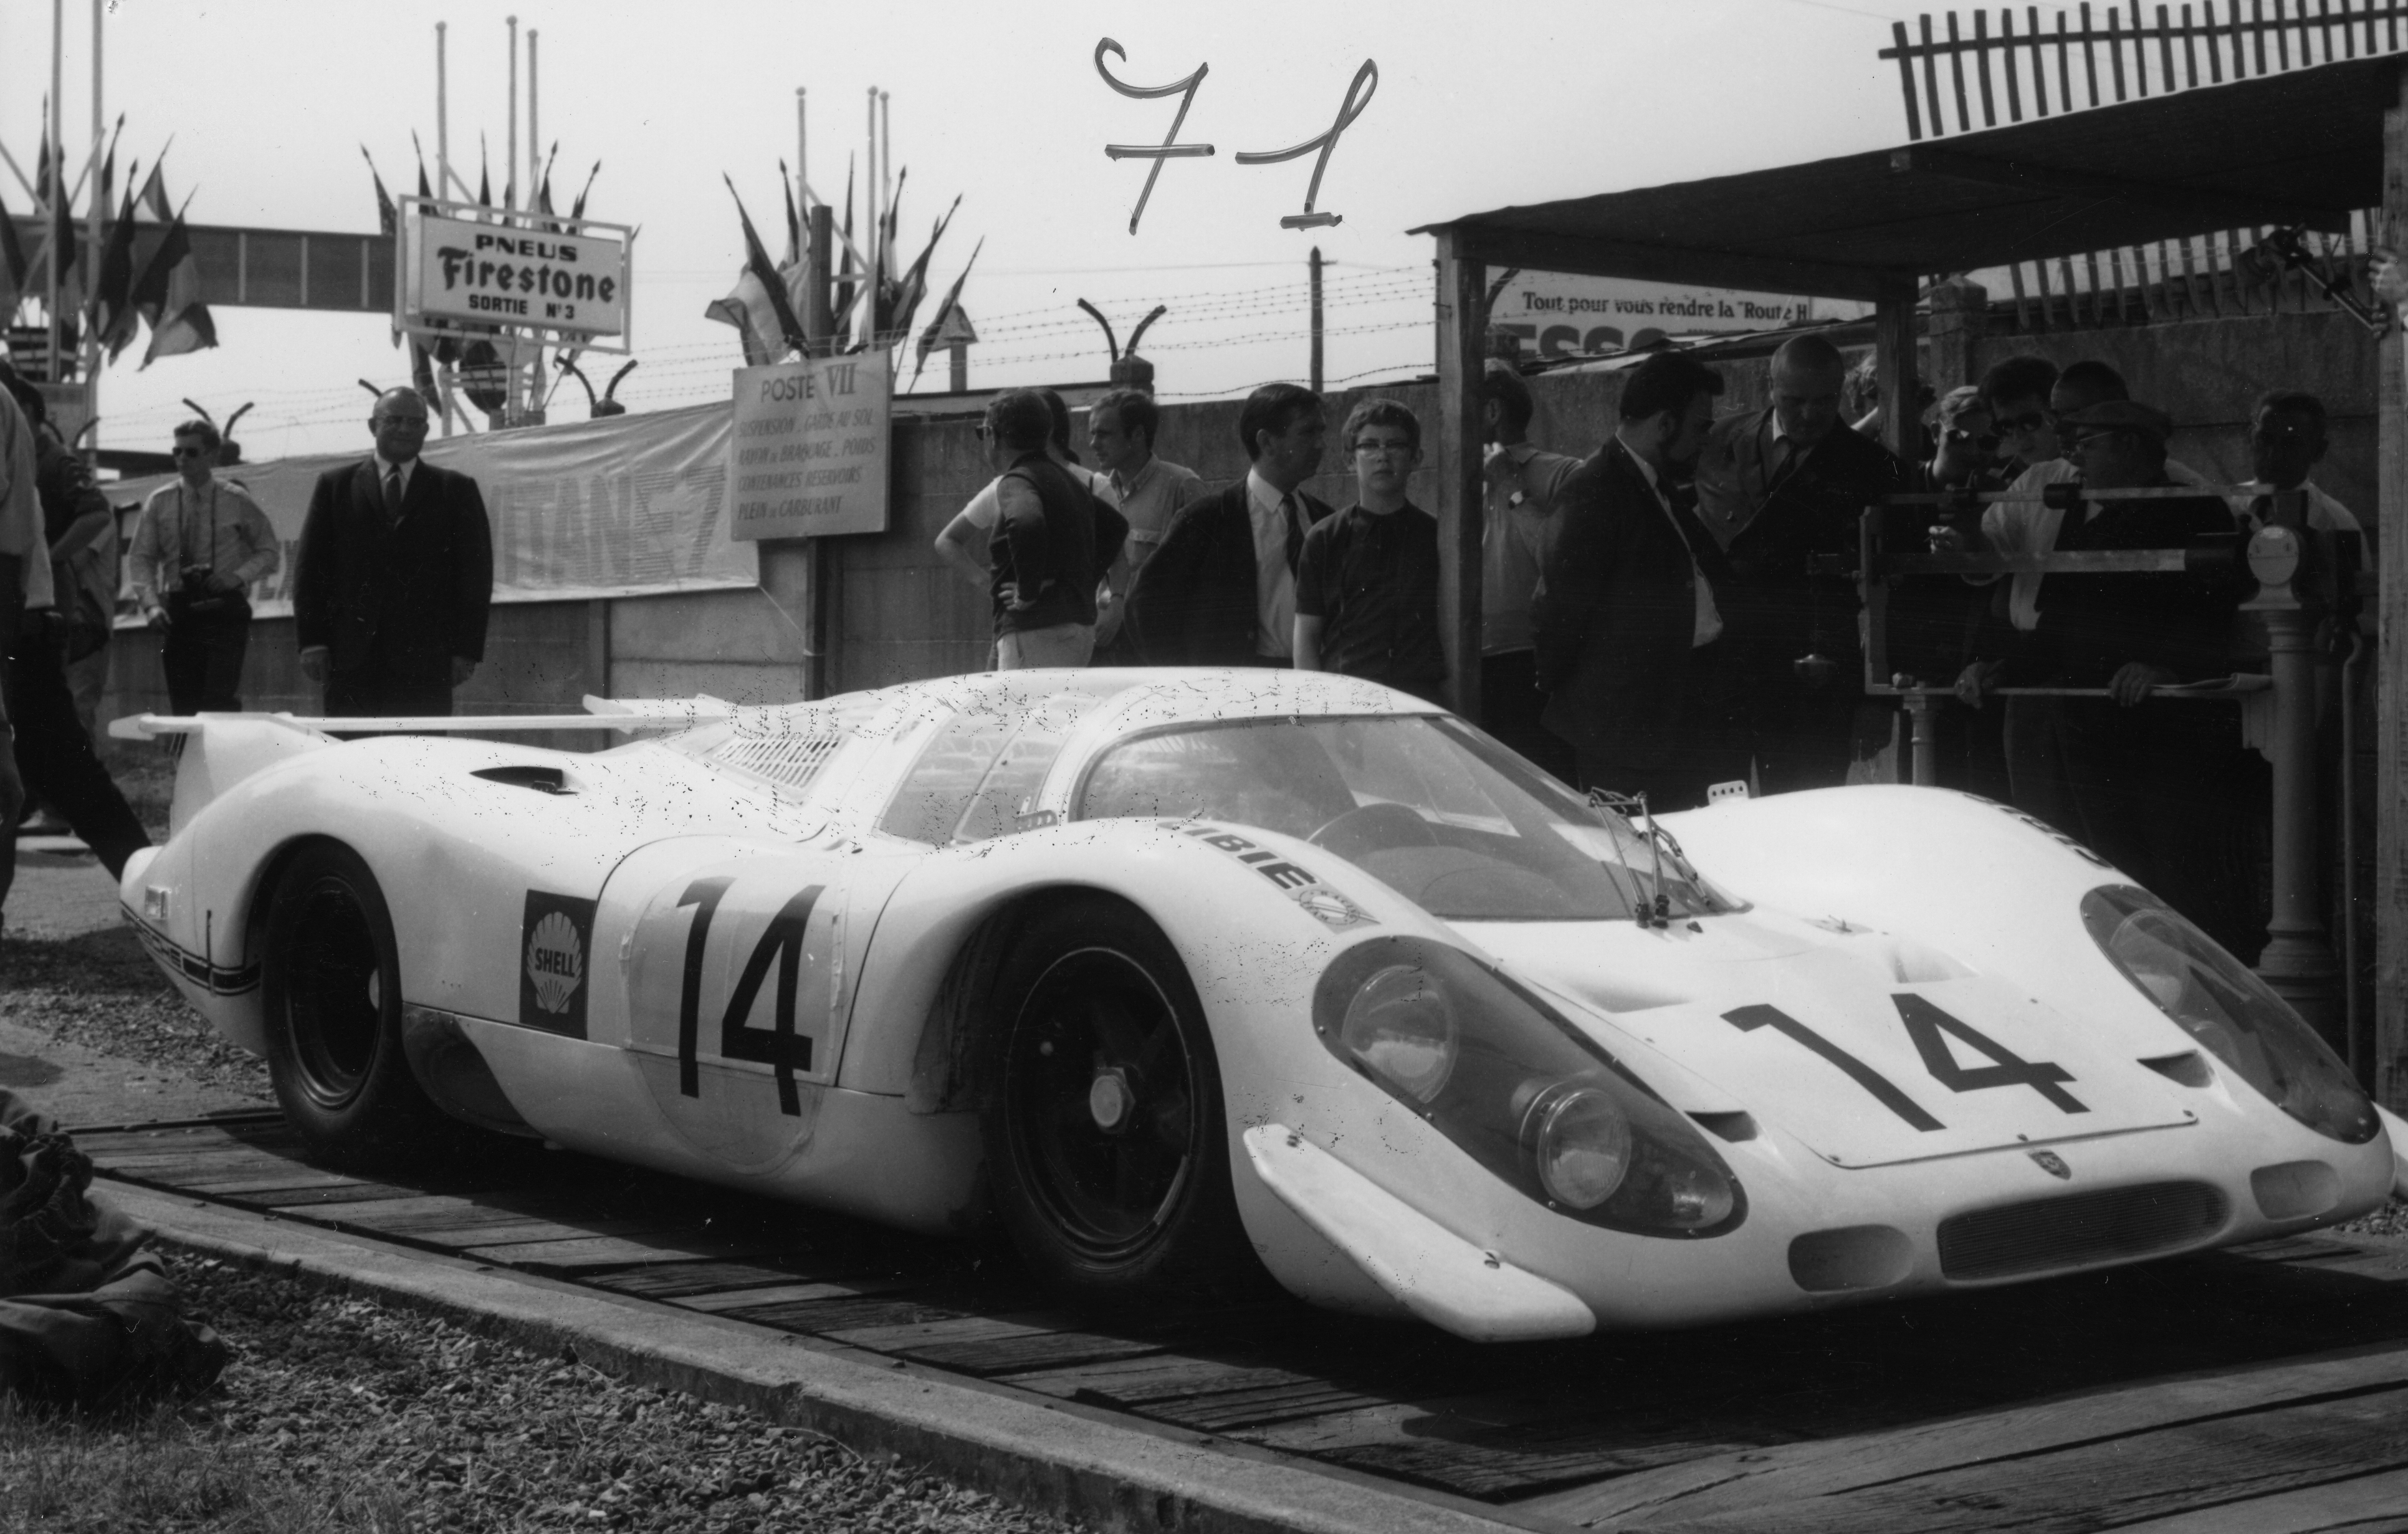 Fitted with the iconic flat-12 engine, the 917 could be identified by its sound alone. Here is the car driven by Rolf Stommelen and Kurt Ahrens Jr. at the 1969 24 Hours, where it took pole position.